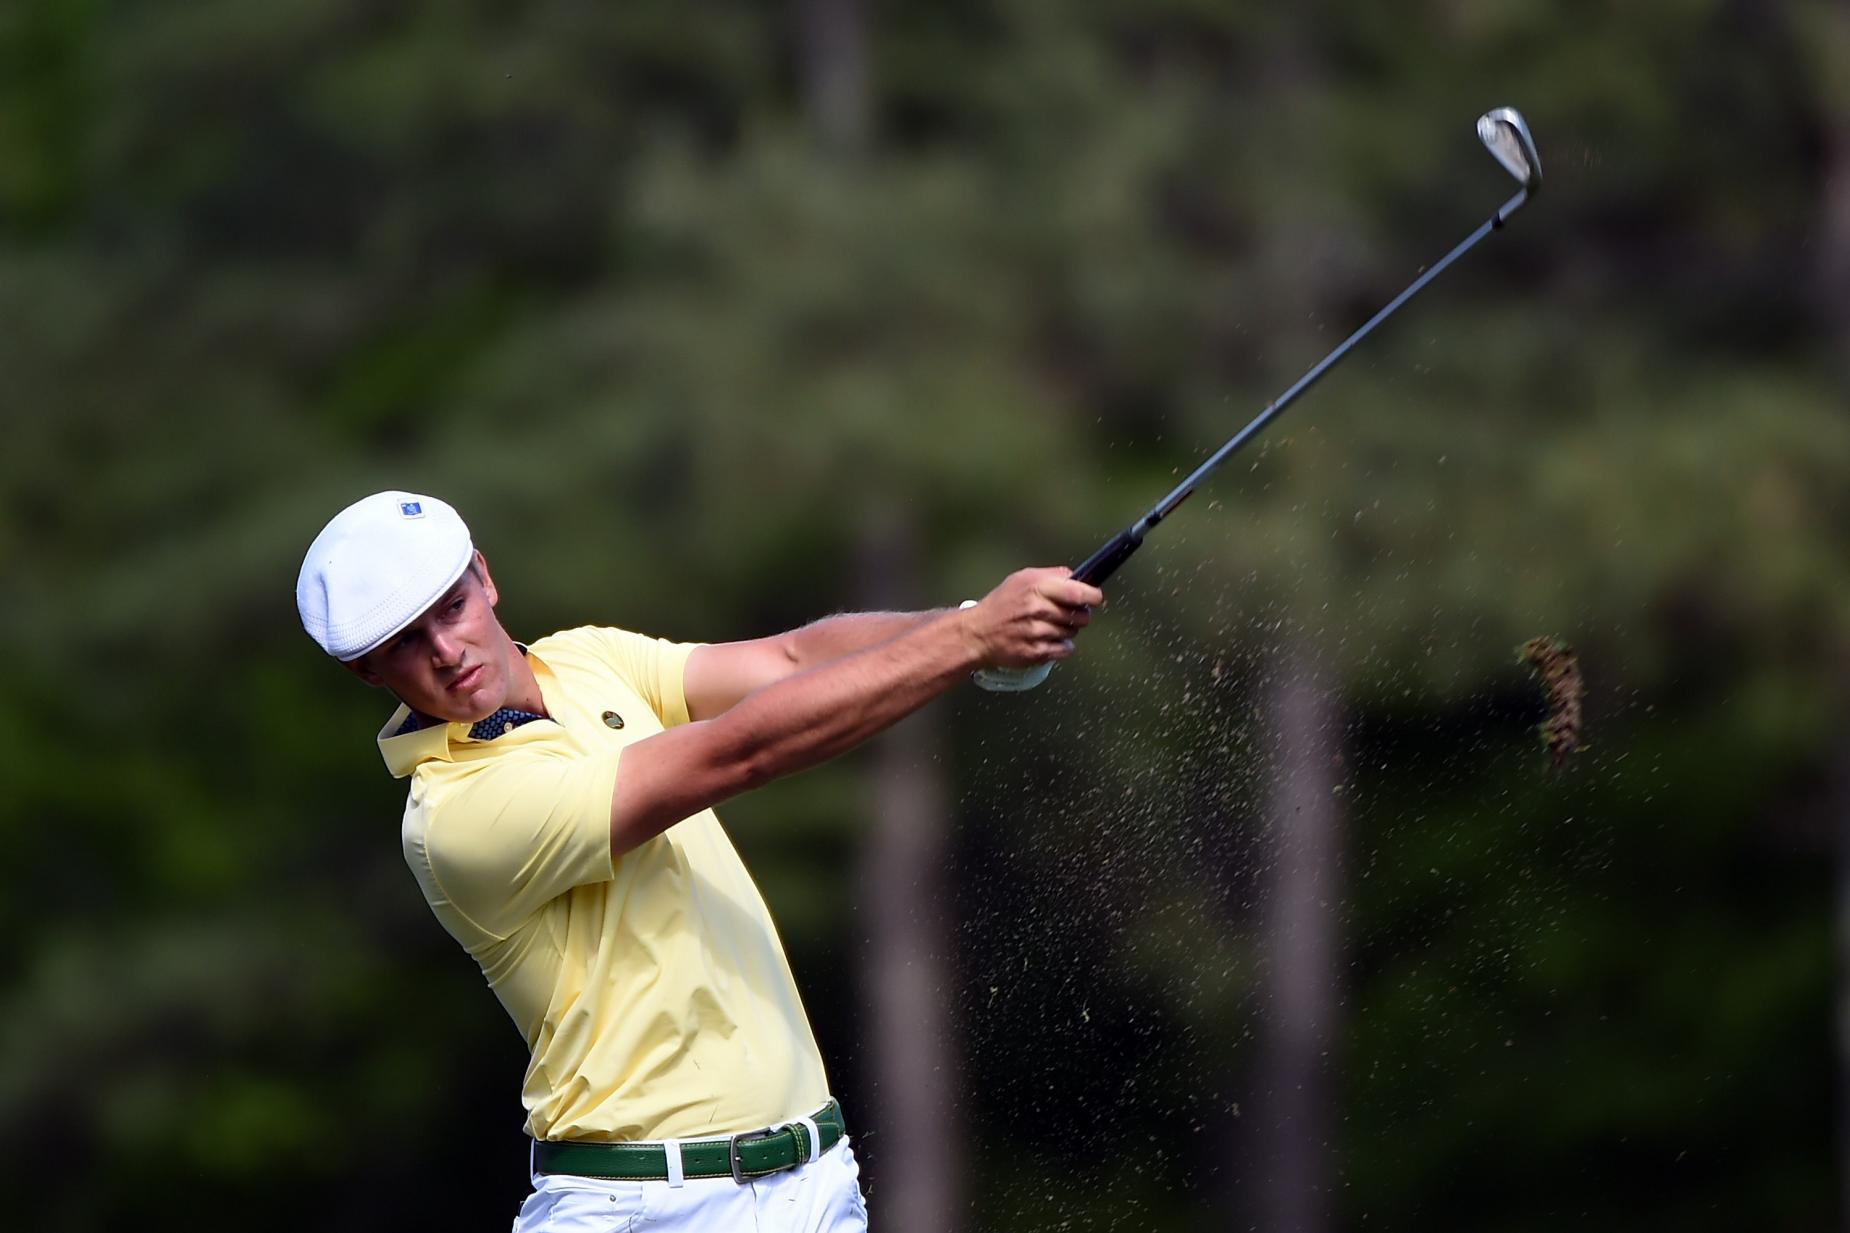 Bryson DeChambeau's oneofakind swing works for him. Would it work